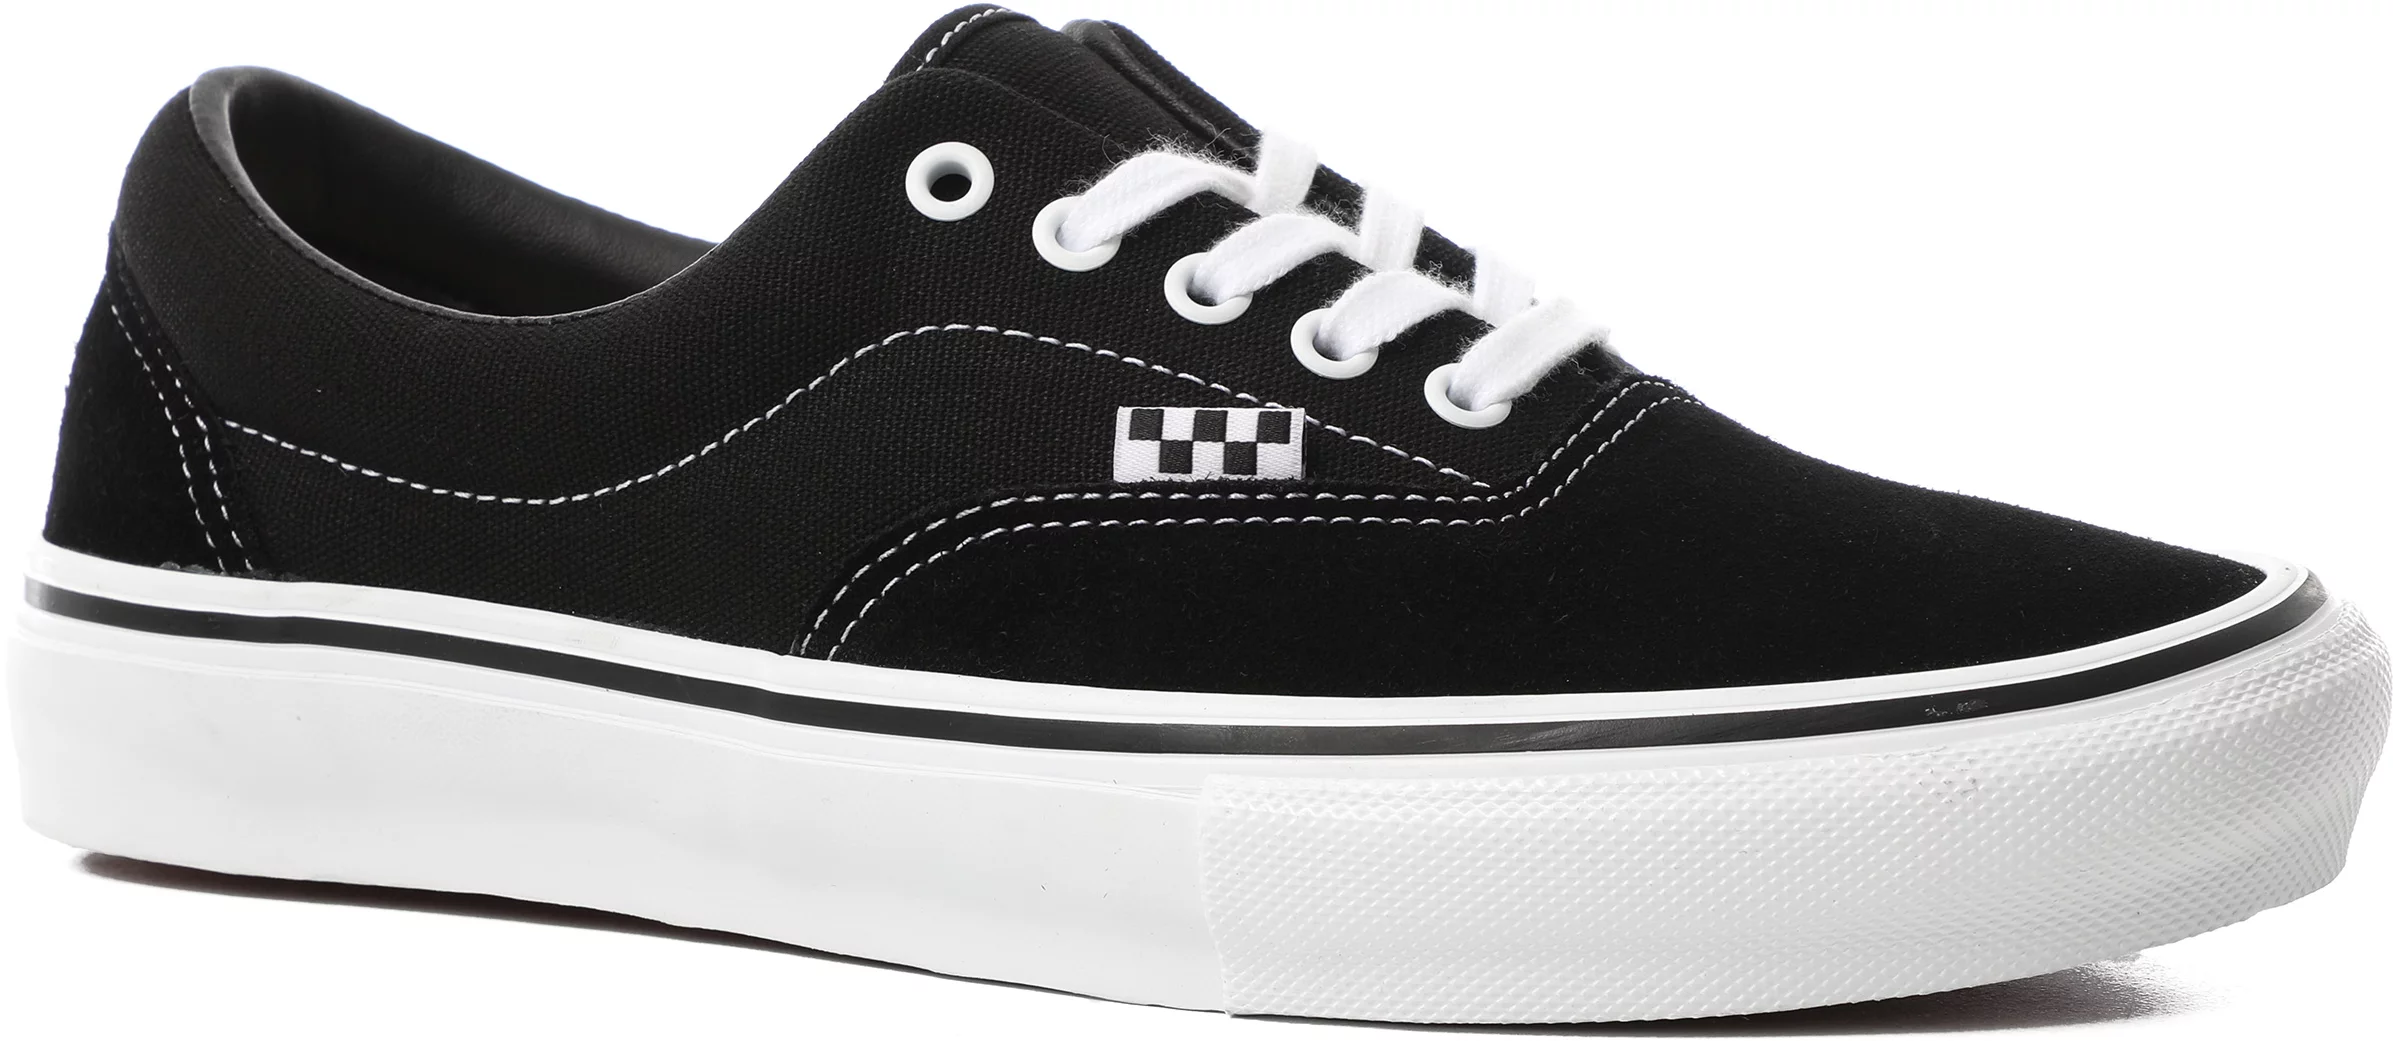 Go up and down Choir To block Vans Skate Era Shoes - black/white - Free Shipping | Tactics